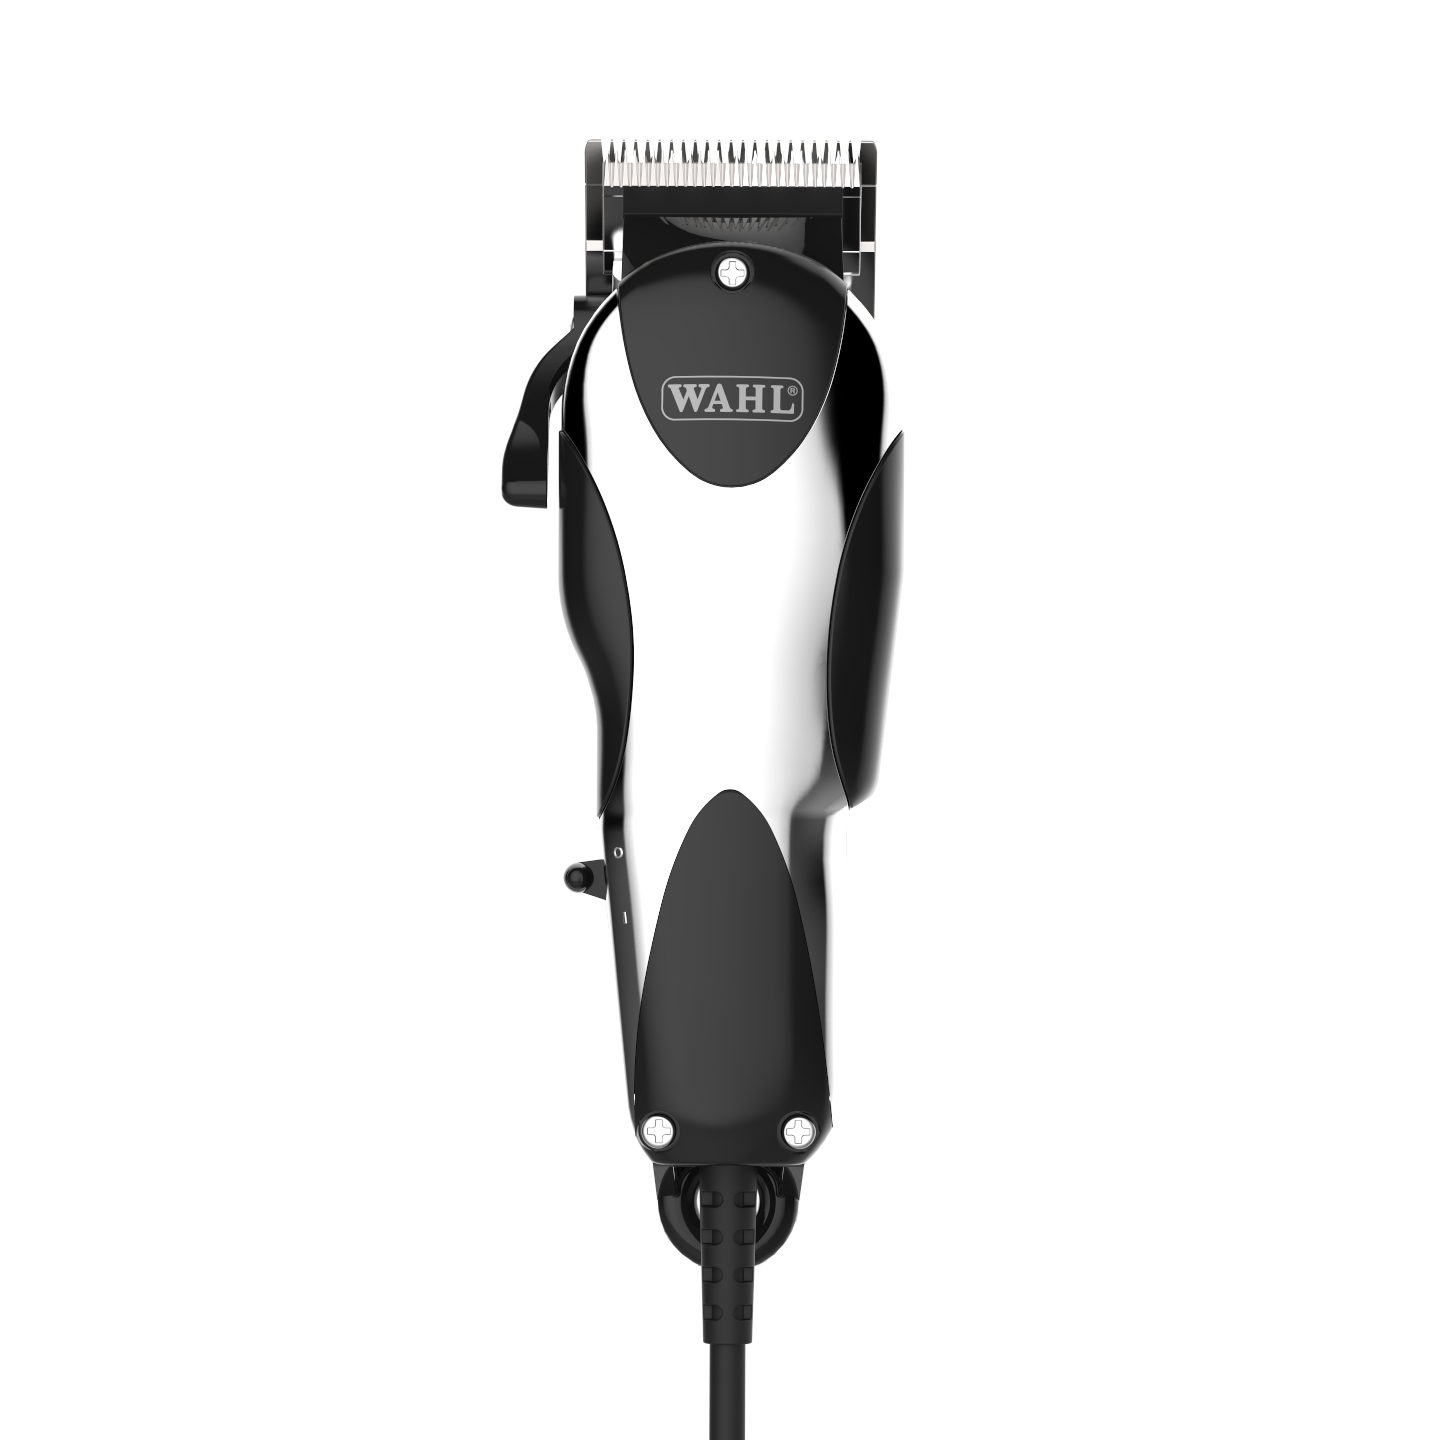 wahl heavy duty clippers